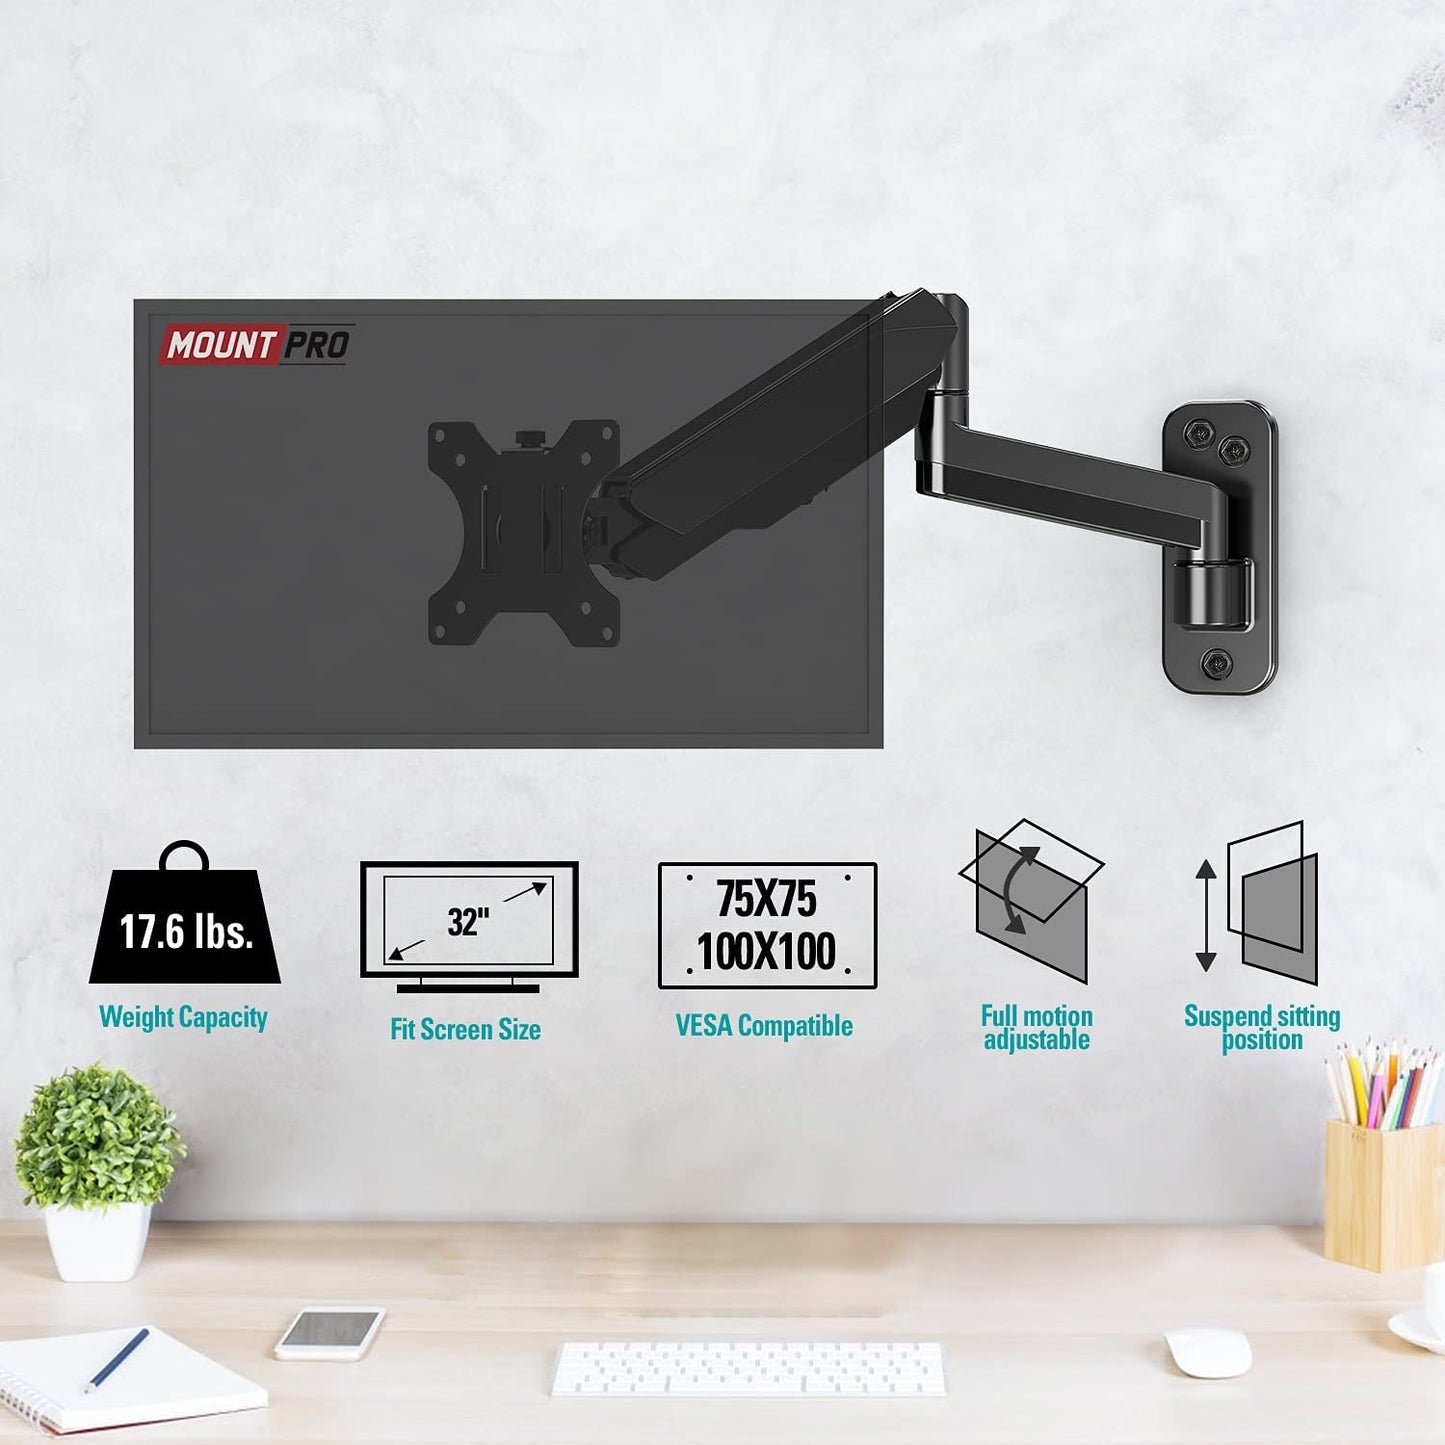 Single Arm wall mounted monitor arm for monitor up to 32''